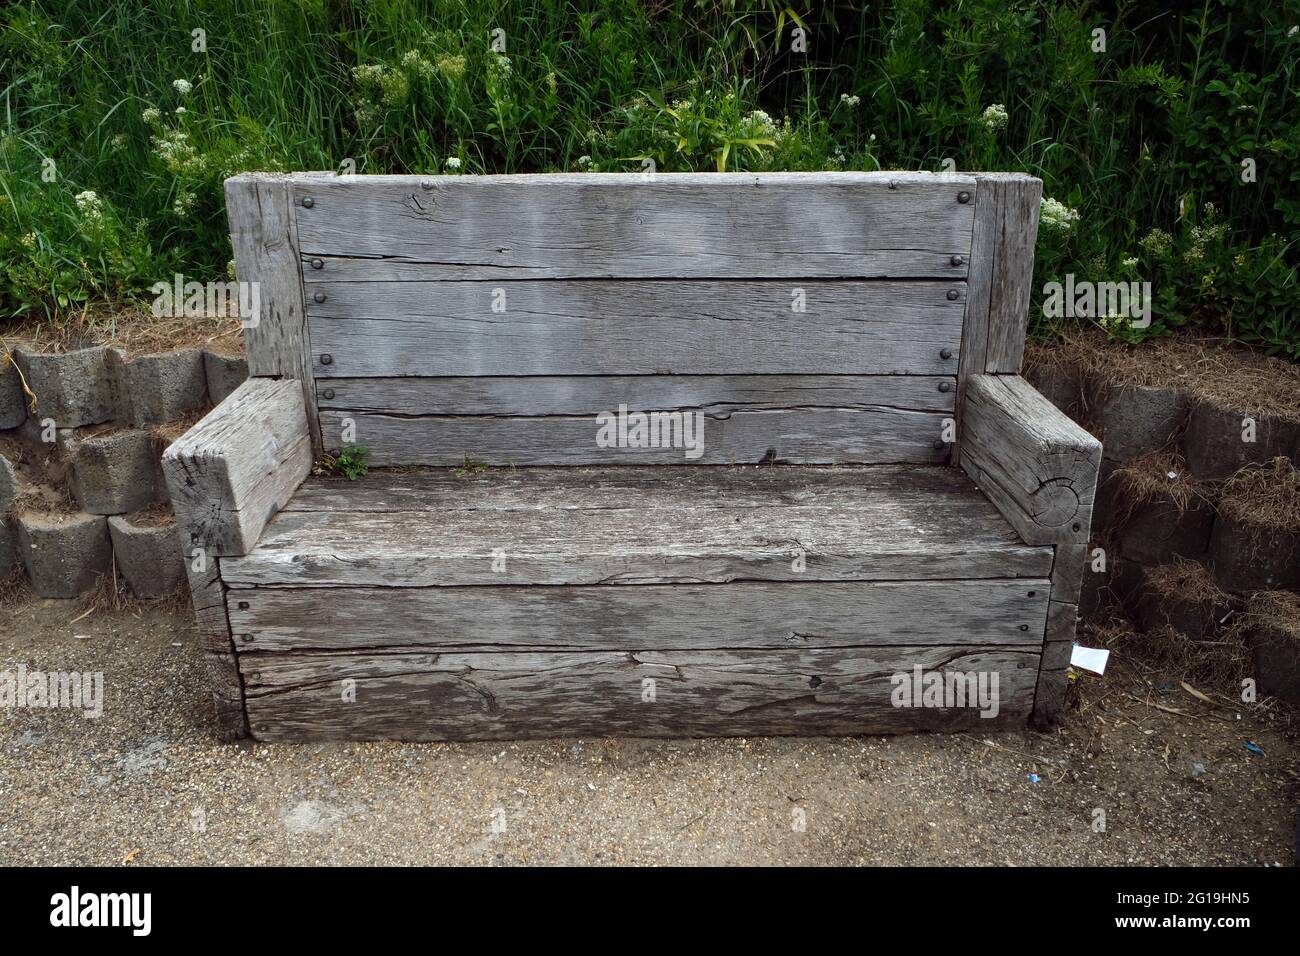 wooden bench at Mablethorpe, Lincolnshire, Stock Photo